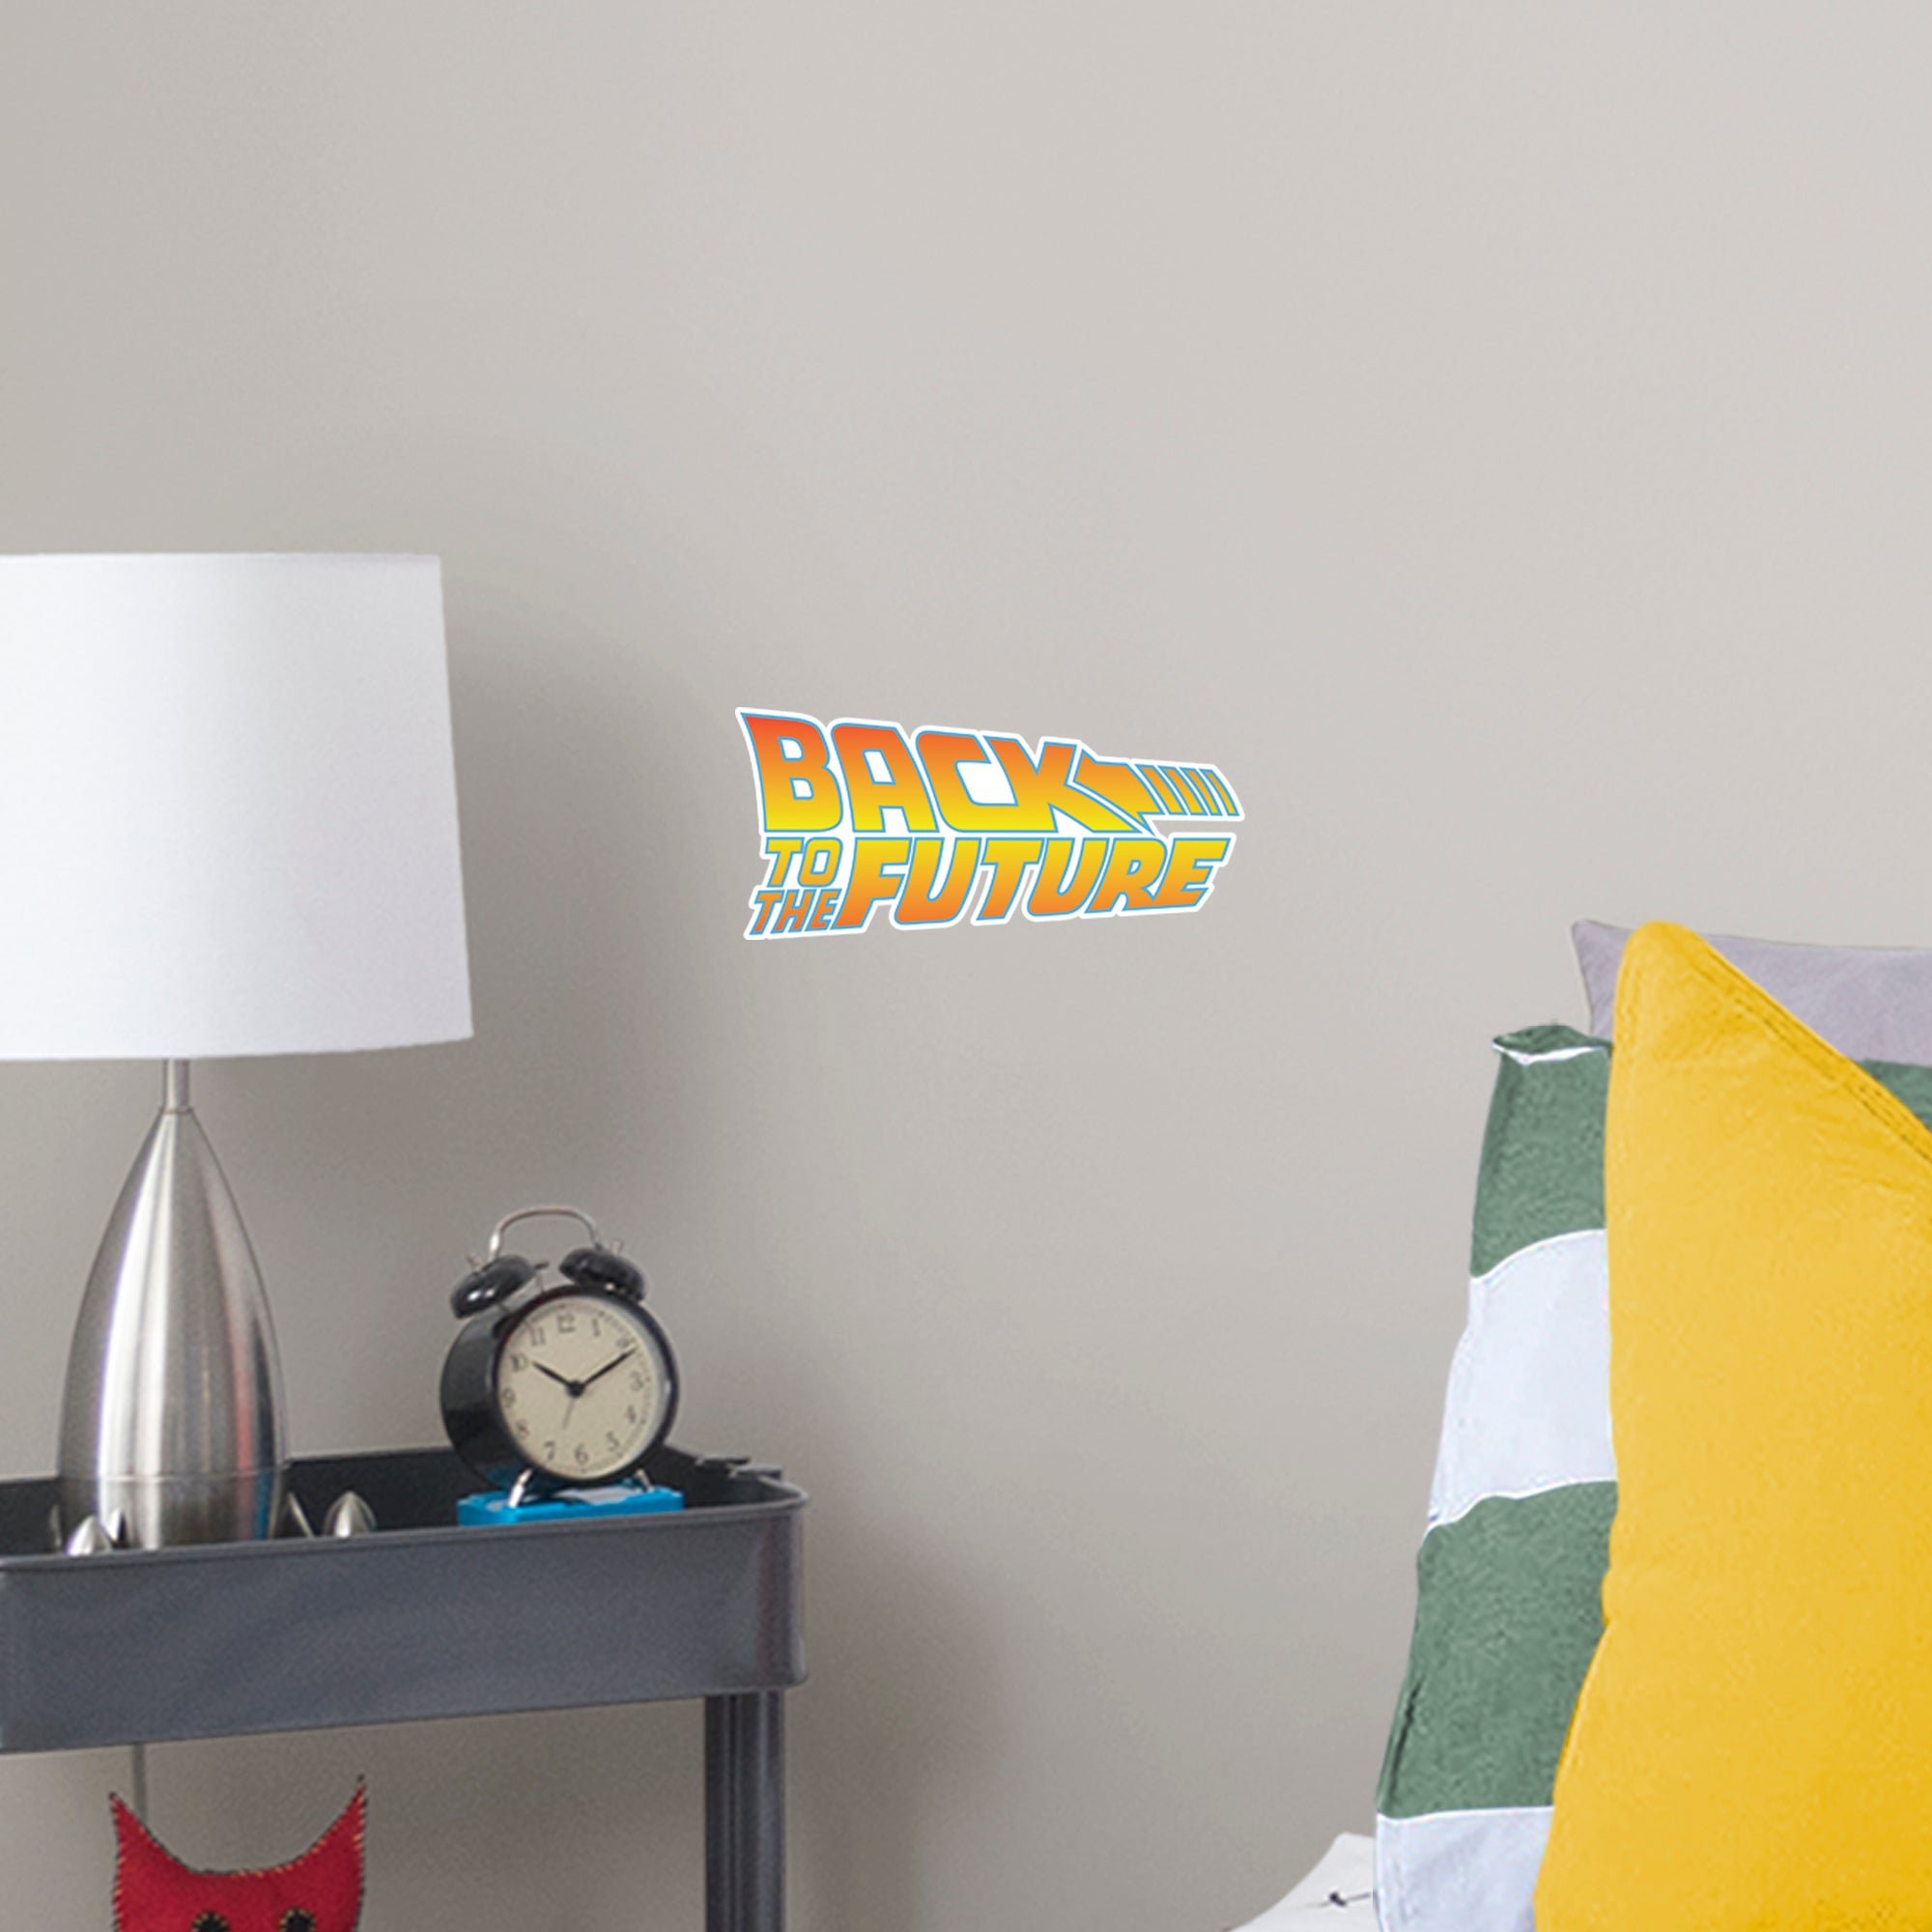 BACK TO THE FUTURE LOGO OFFICIALLY LICENSED NBC UNIVERSAL REMOVABLE Wall DECAL Large by Fathead | Vinyl